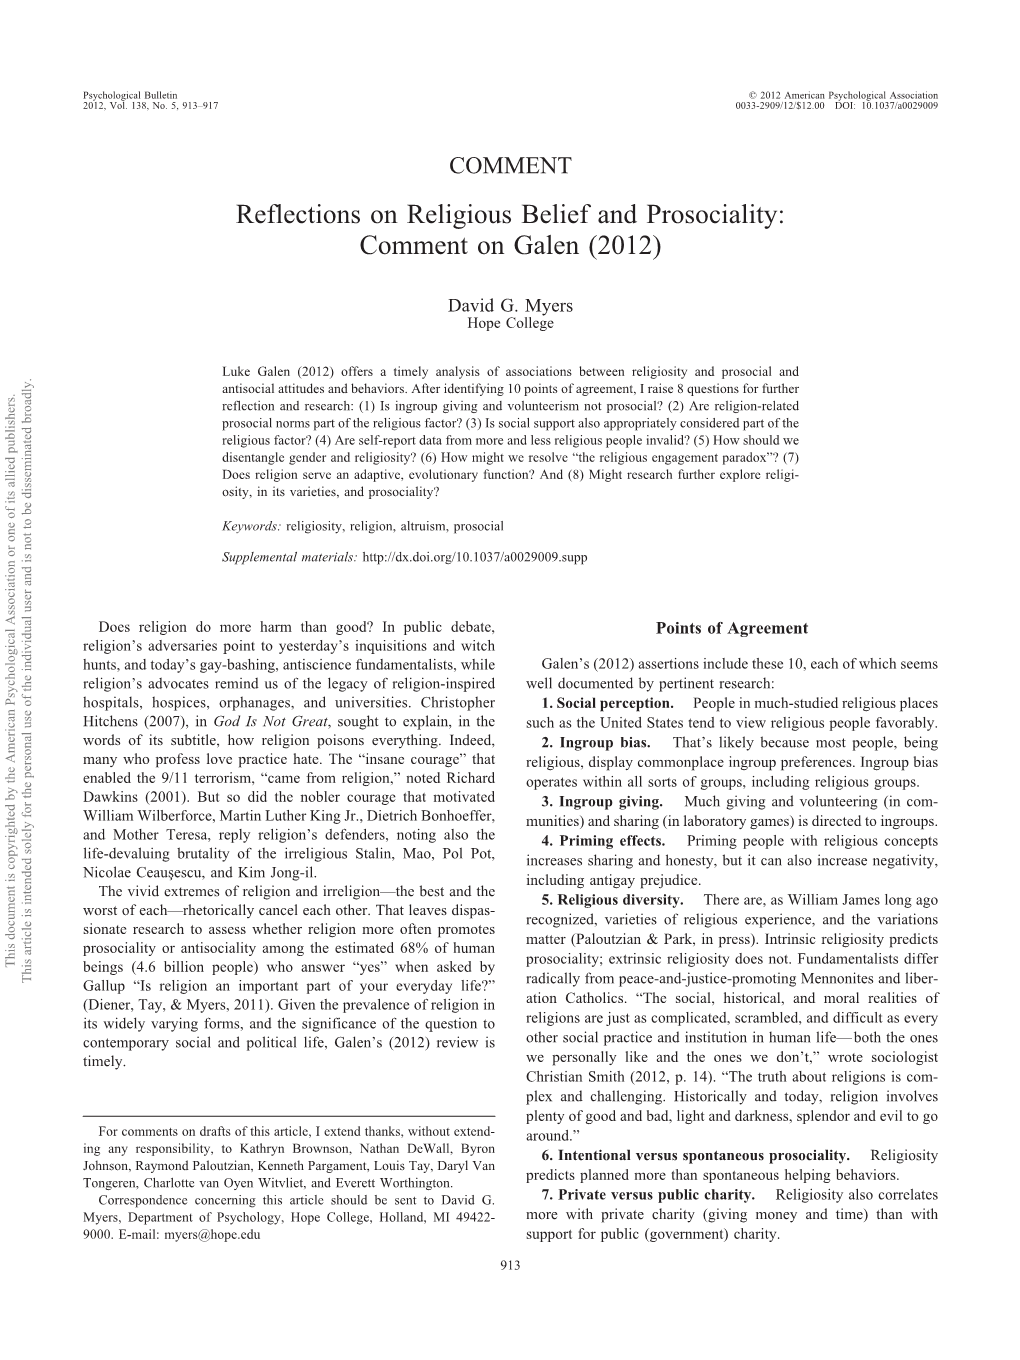 Reflections on Religious Belief and Prosociality: Comment on Galen (2012)